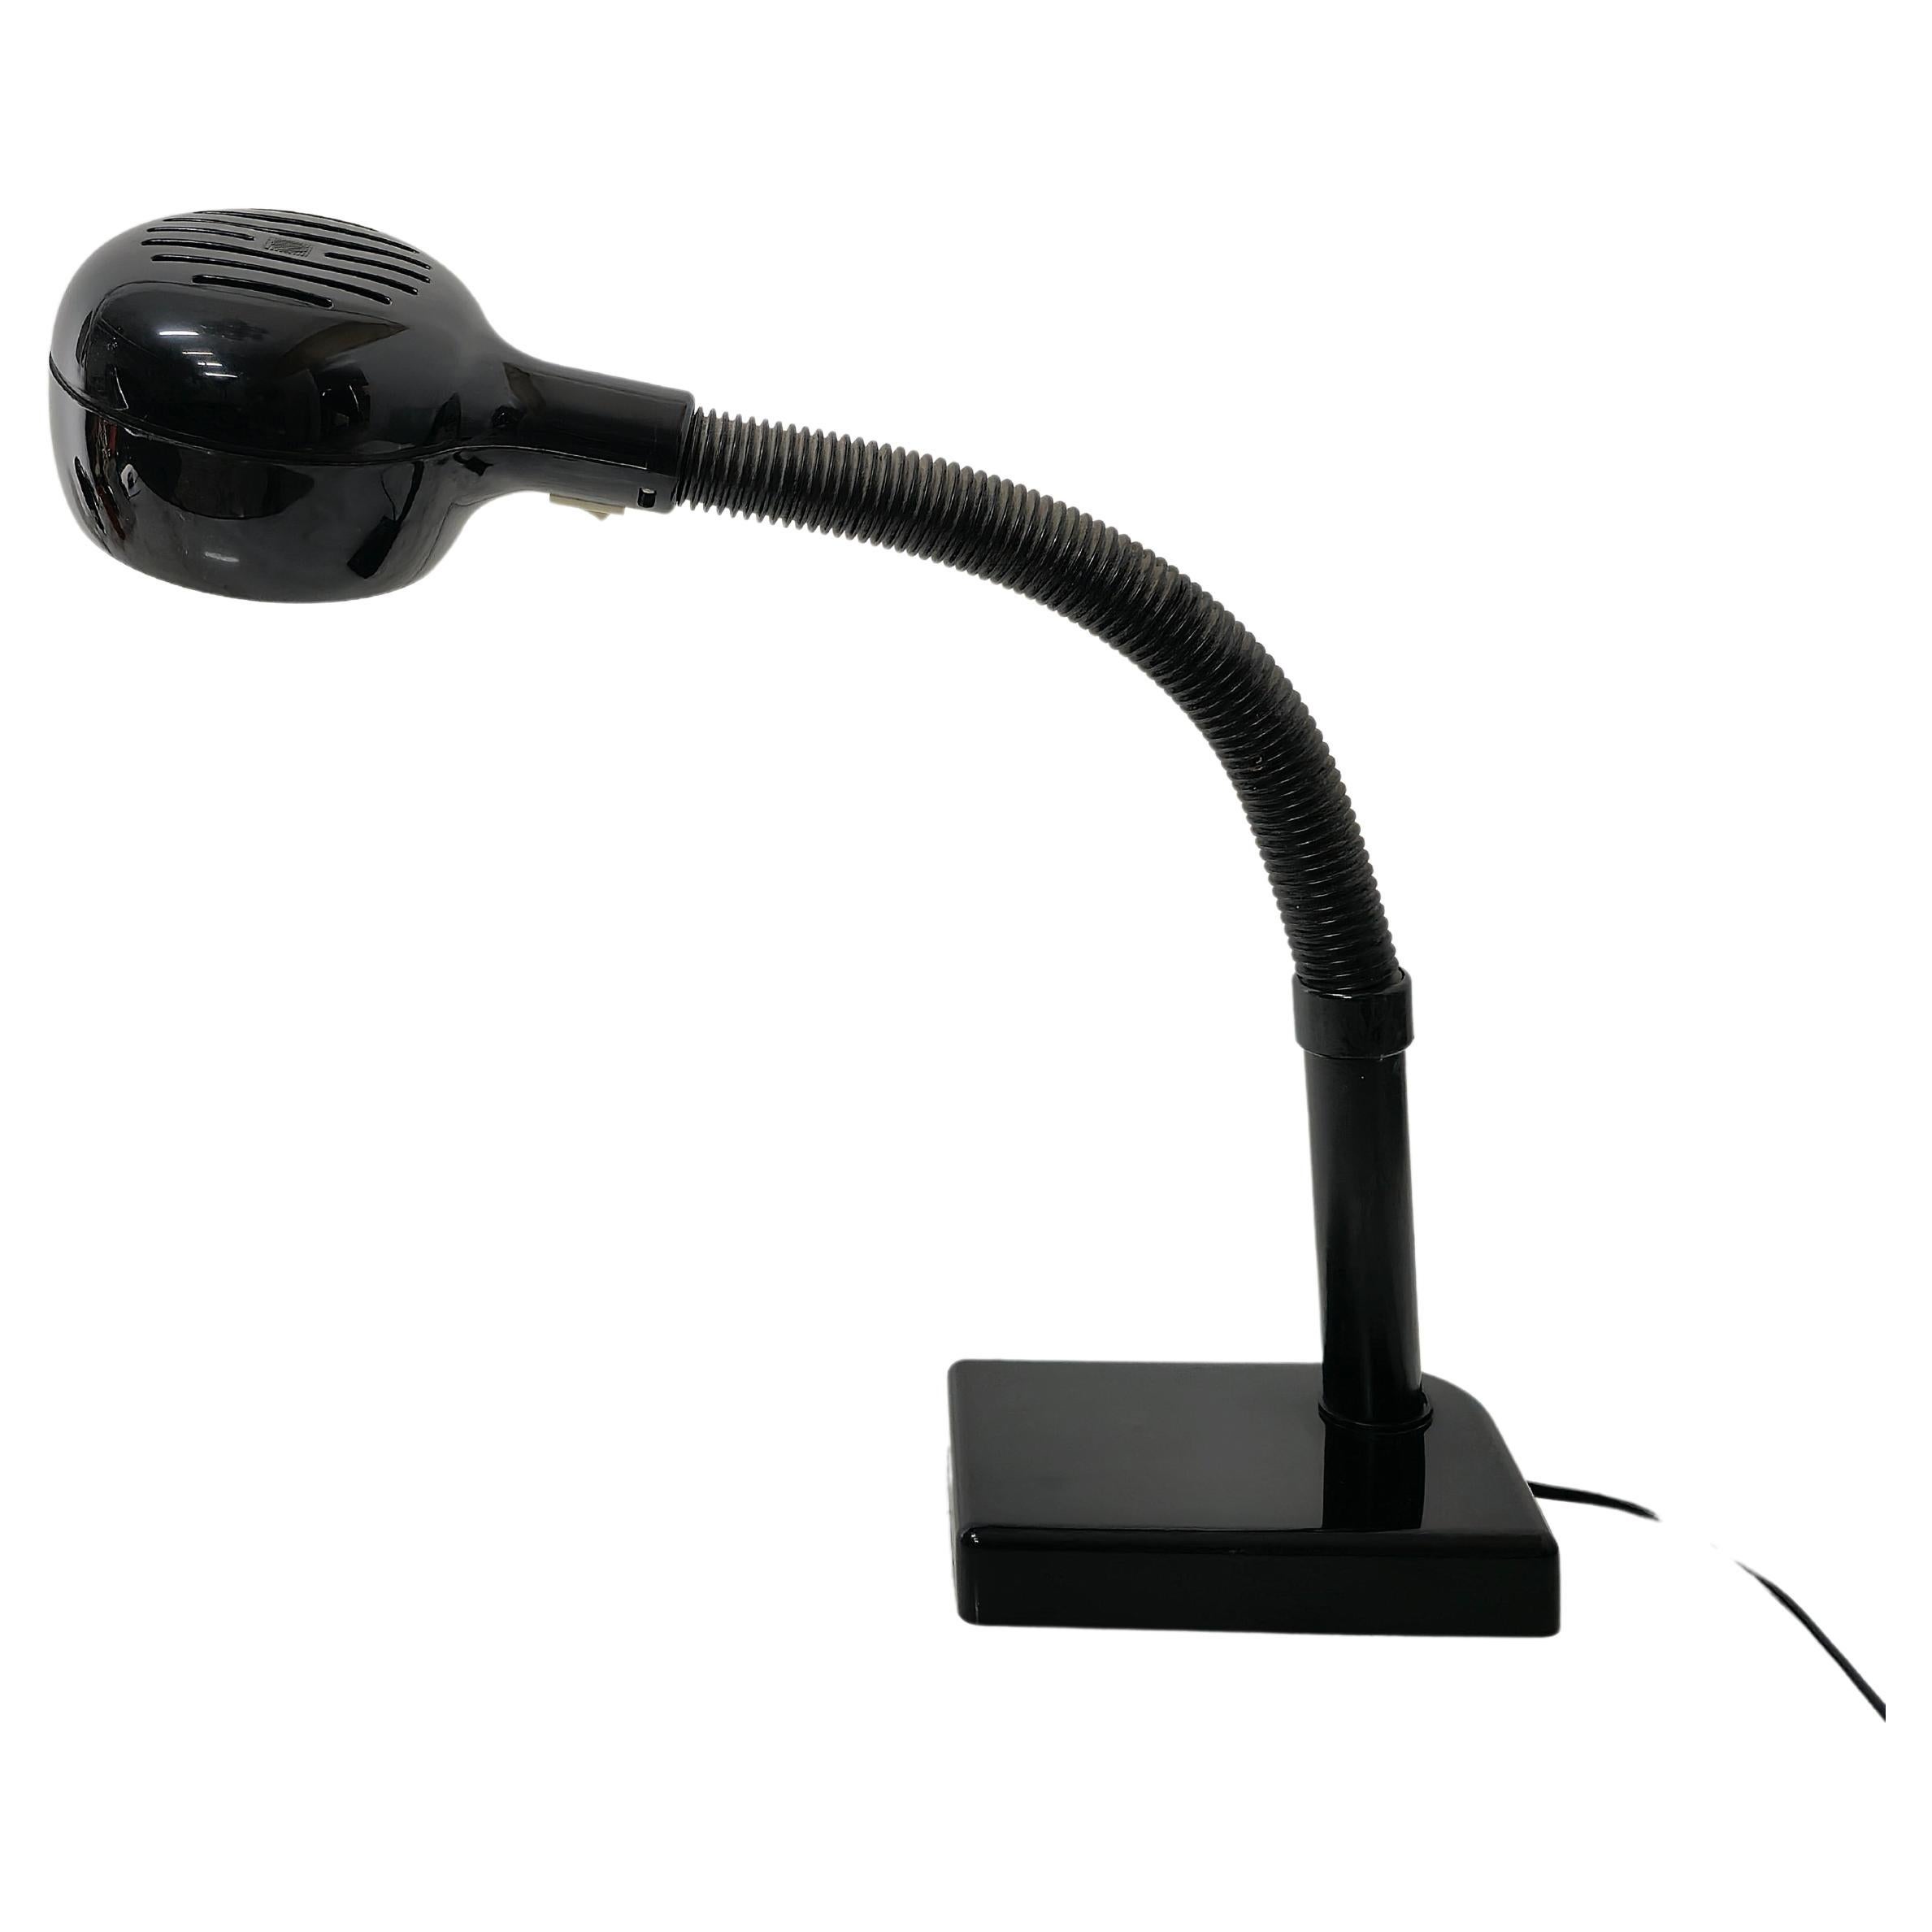 Table lamp with 1 E27 light designed by Vico Magistretti and produced in Italy in the 70s.
The lamp was made of black plastic and can be directed via its flexible arm.



Note: We try to offer our customers an excellent service even in shipments all